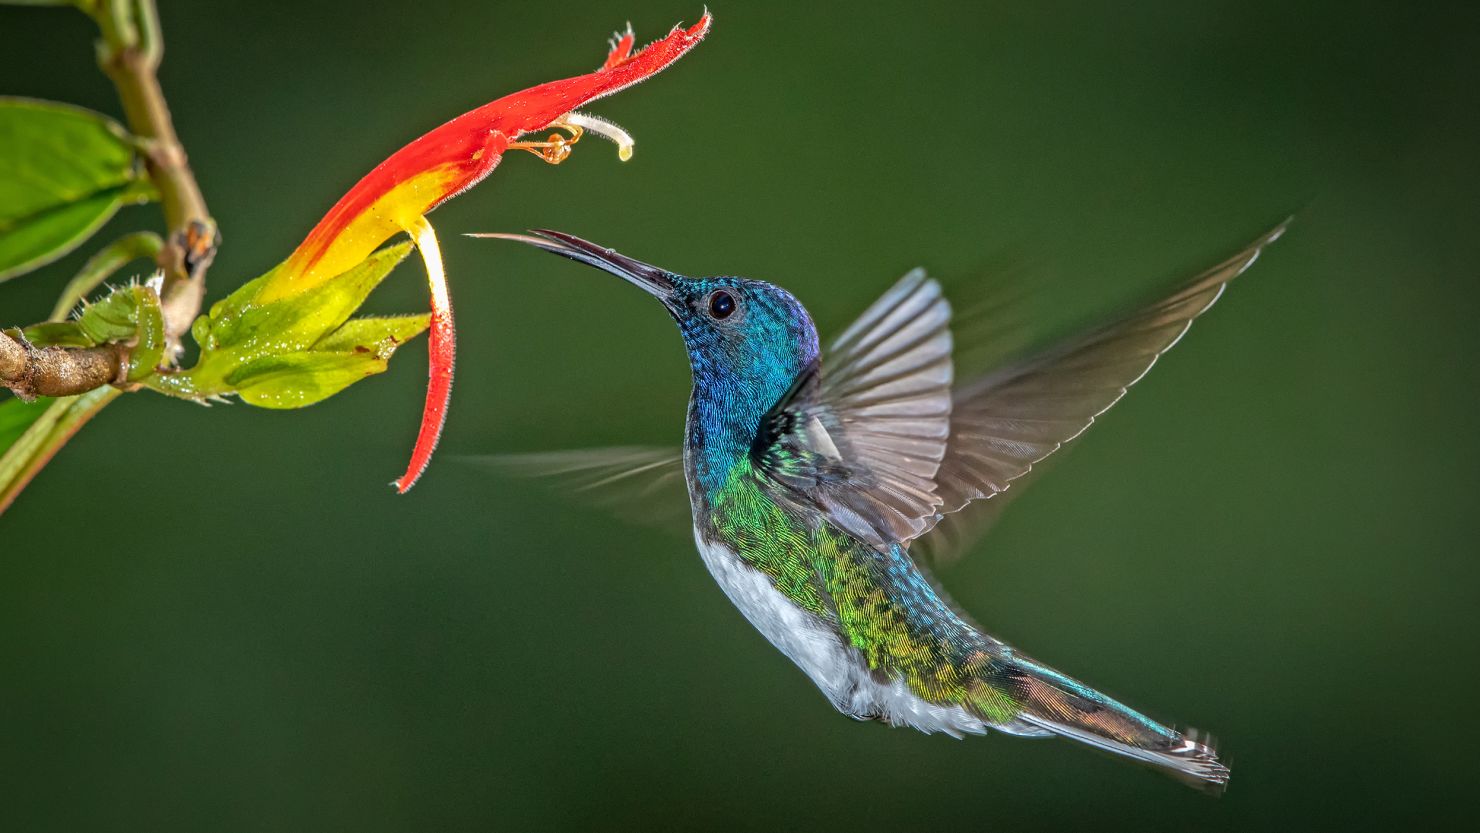 White-necked jacobin hummingbirds may engage in physical fights with other hummingbirds for food.